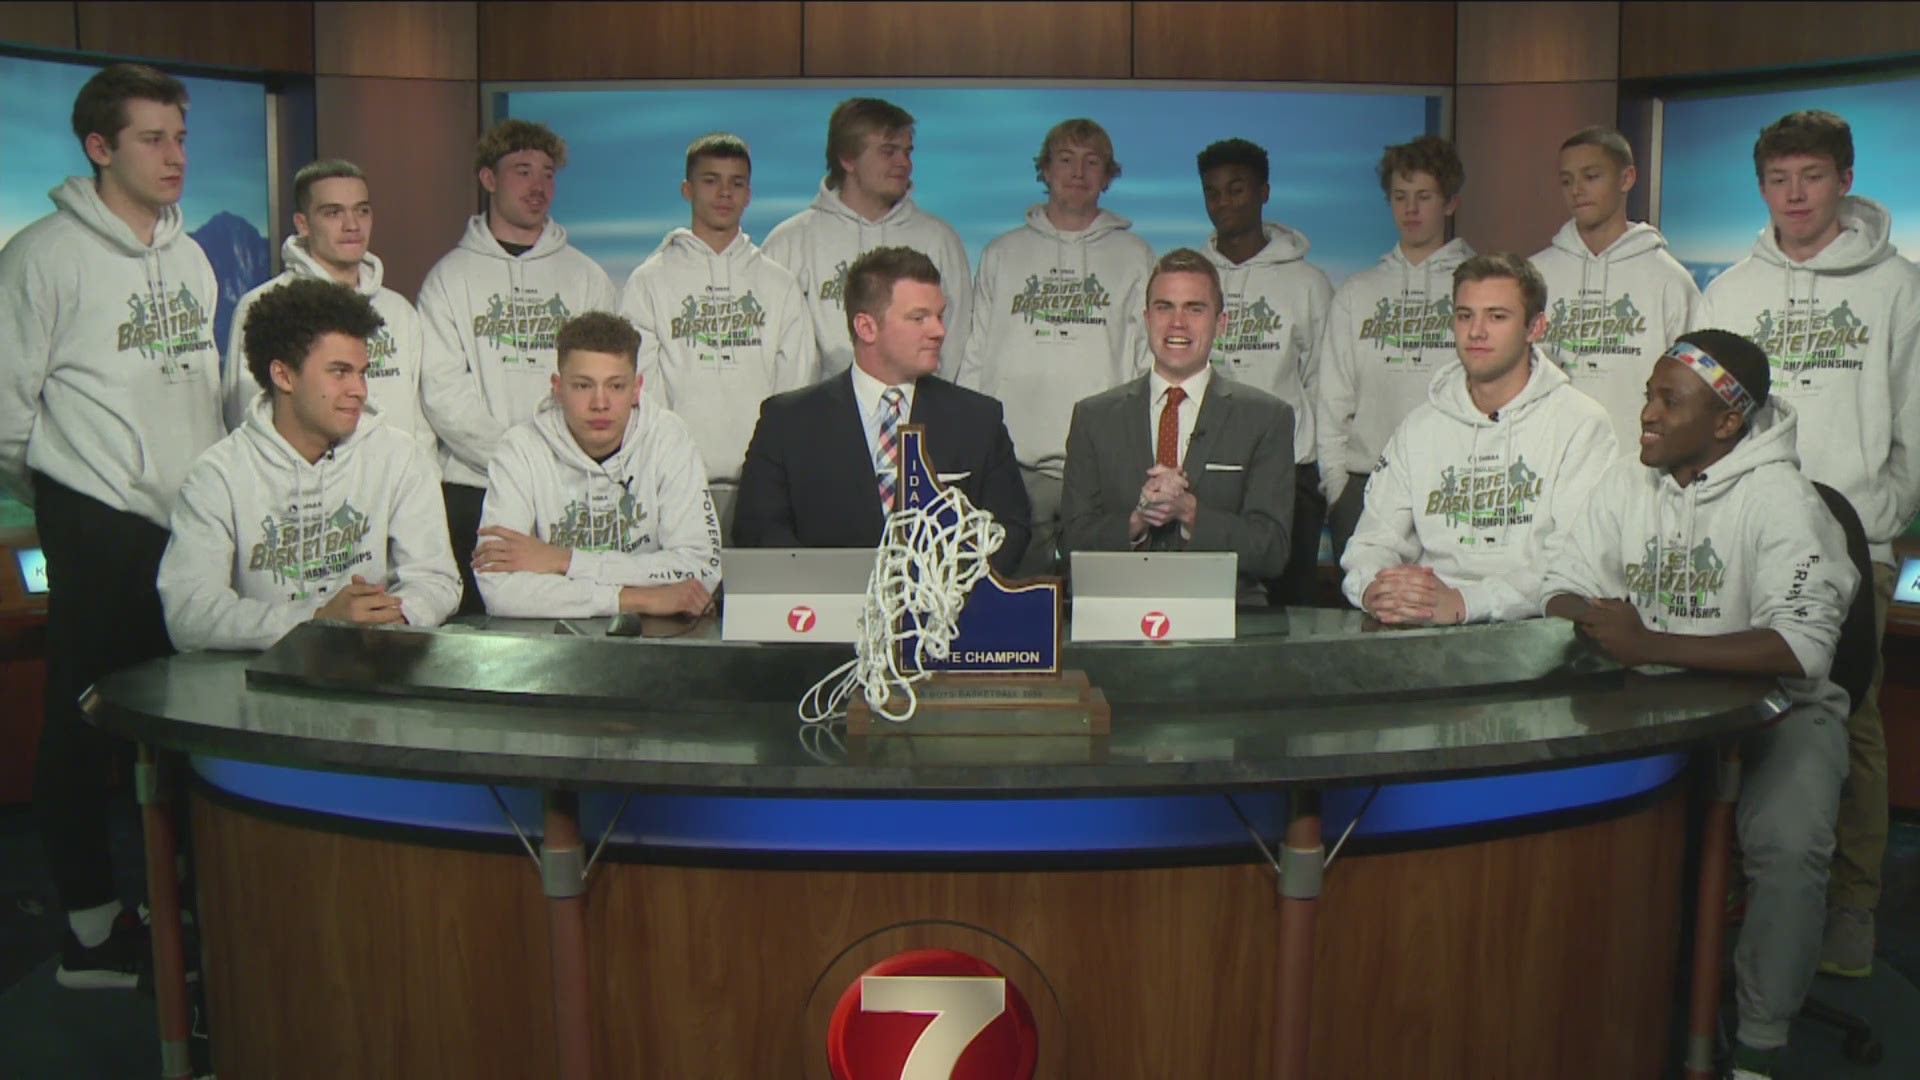 The Borah High School boys basketball team joined Jay Tust and Will Hall in studio after winning the 2019 5A state championship, 62-50 against Madison.